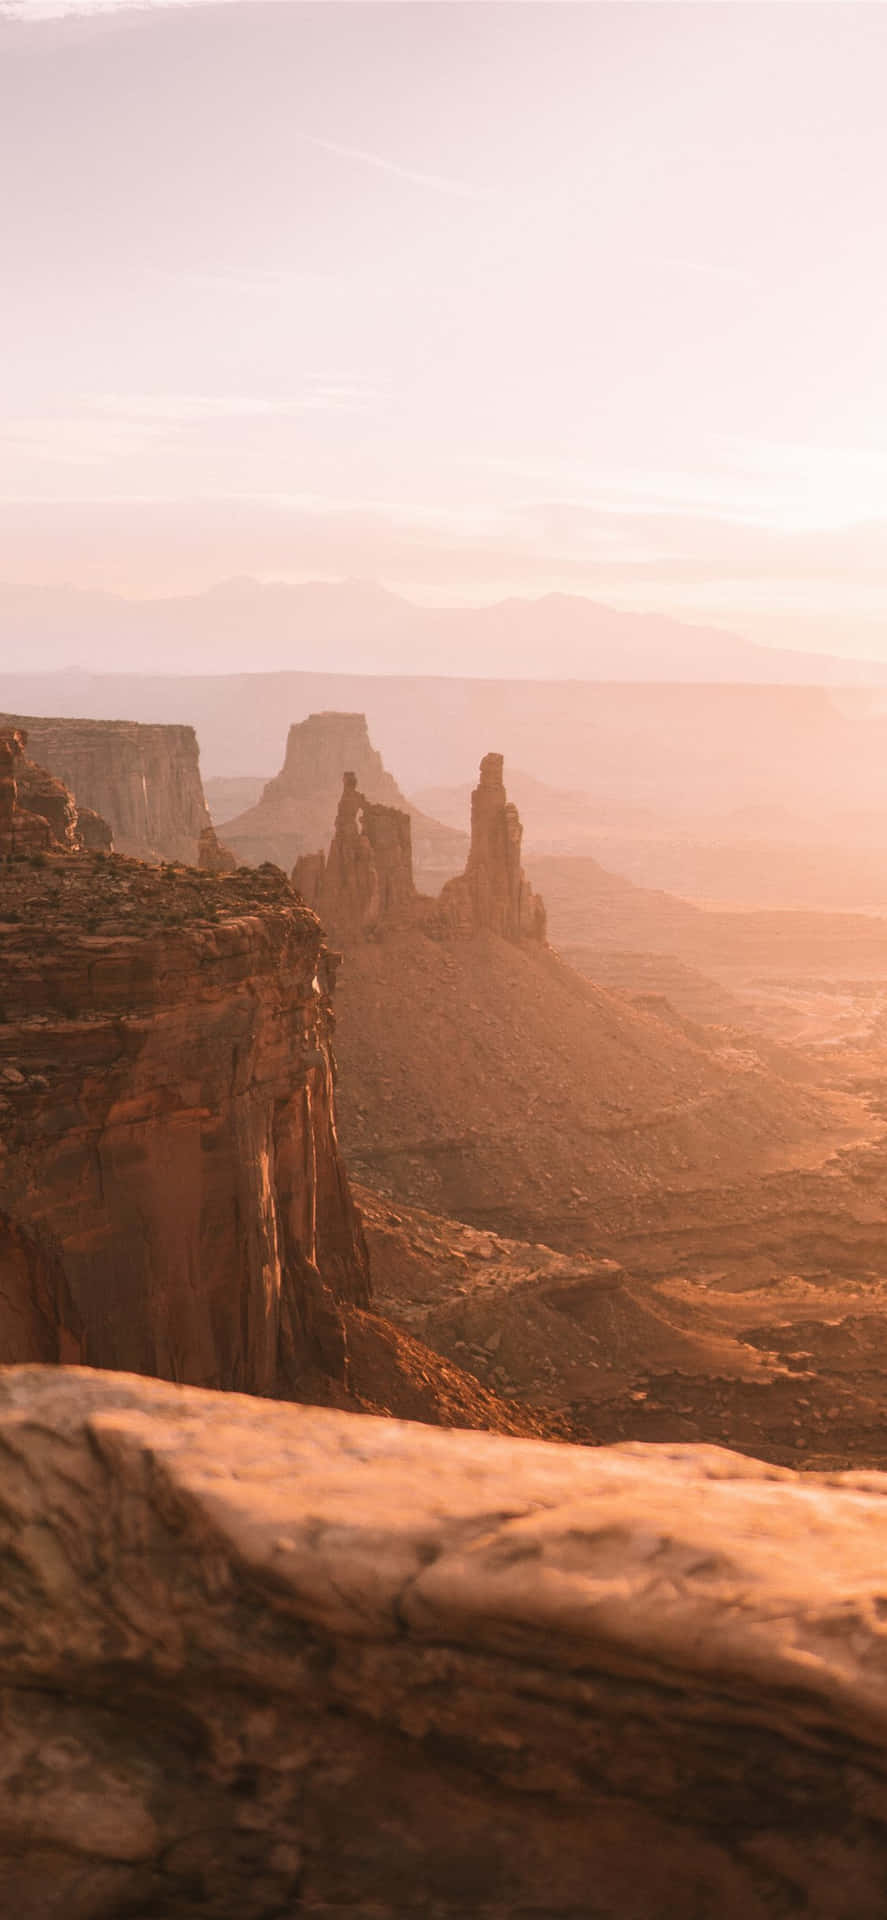 Explore The Desert With An Apple Iphone Wallpaper